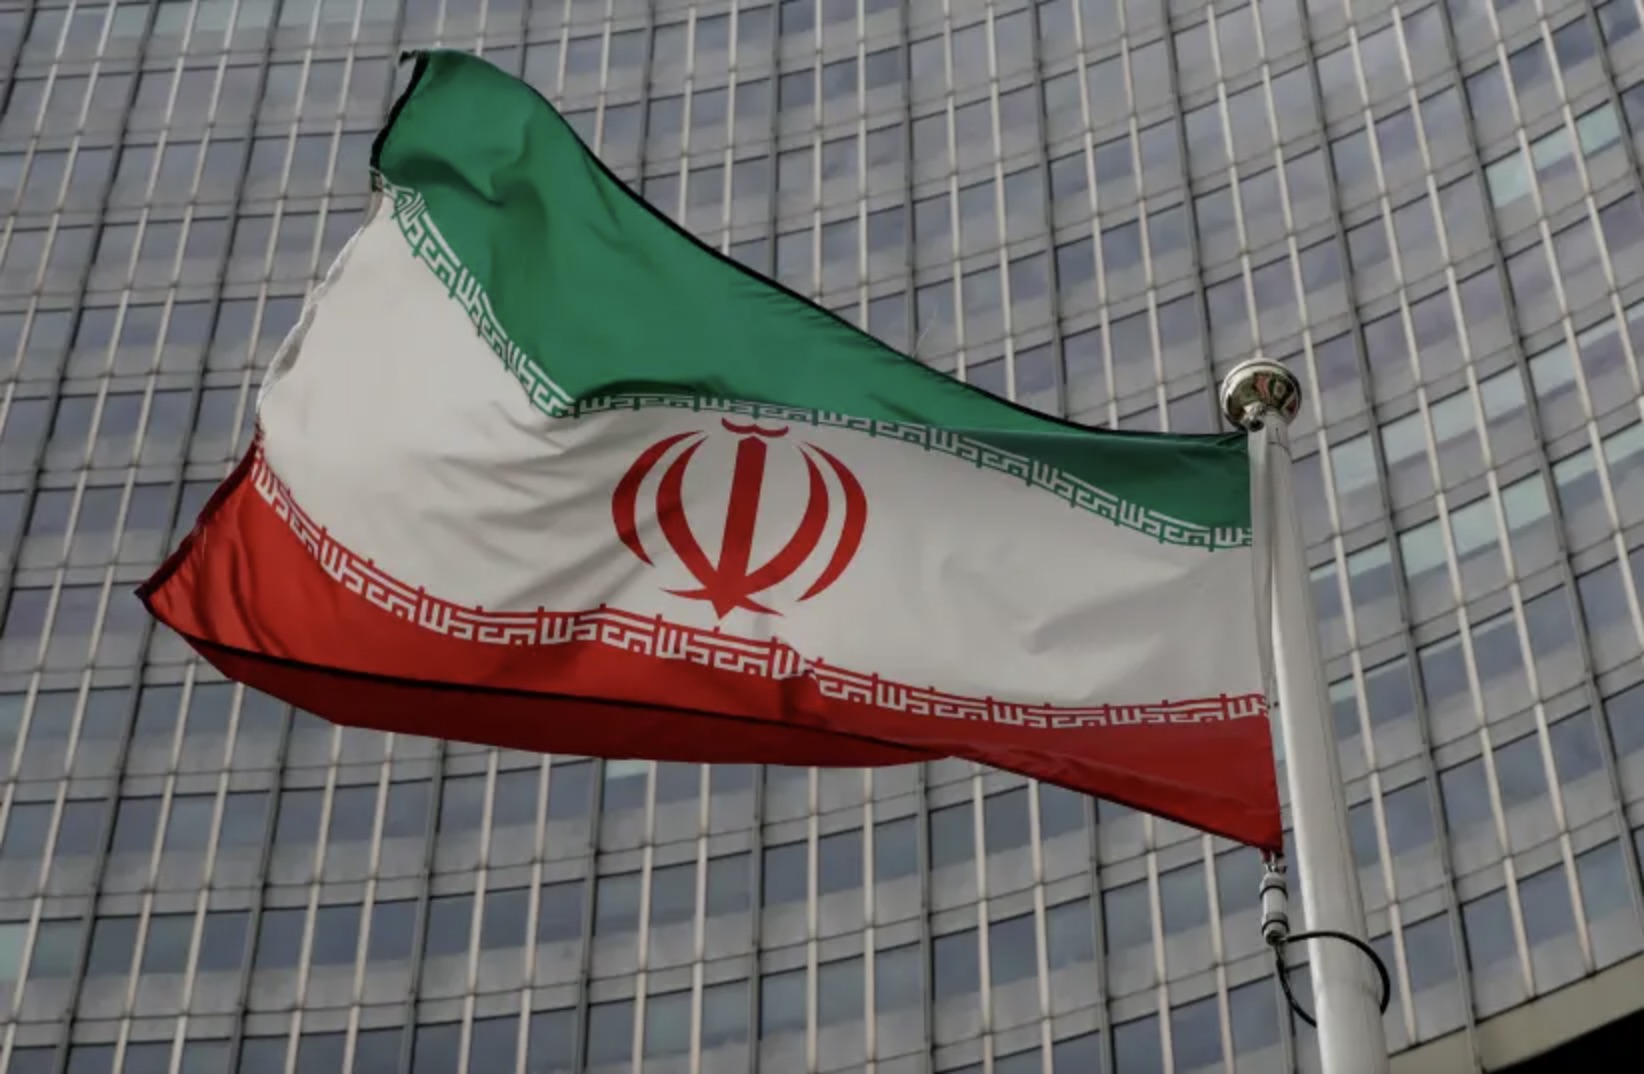 plane crash at the Boryspil… REUTERS 19/01/2020 12:16 IRAN-NUCLEAR/IAEA FILE PHOTO: An Iranian flag flutters in front of the IAEA headquarters in Vienna REUTERS Link copied to clipboard. (internationalbox) FILE PHOTO: An Iranian flag flutters in front of the IAEA headquarters in Vienna 19/01/2020 12